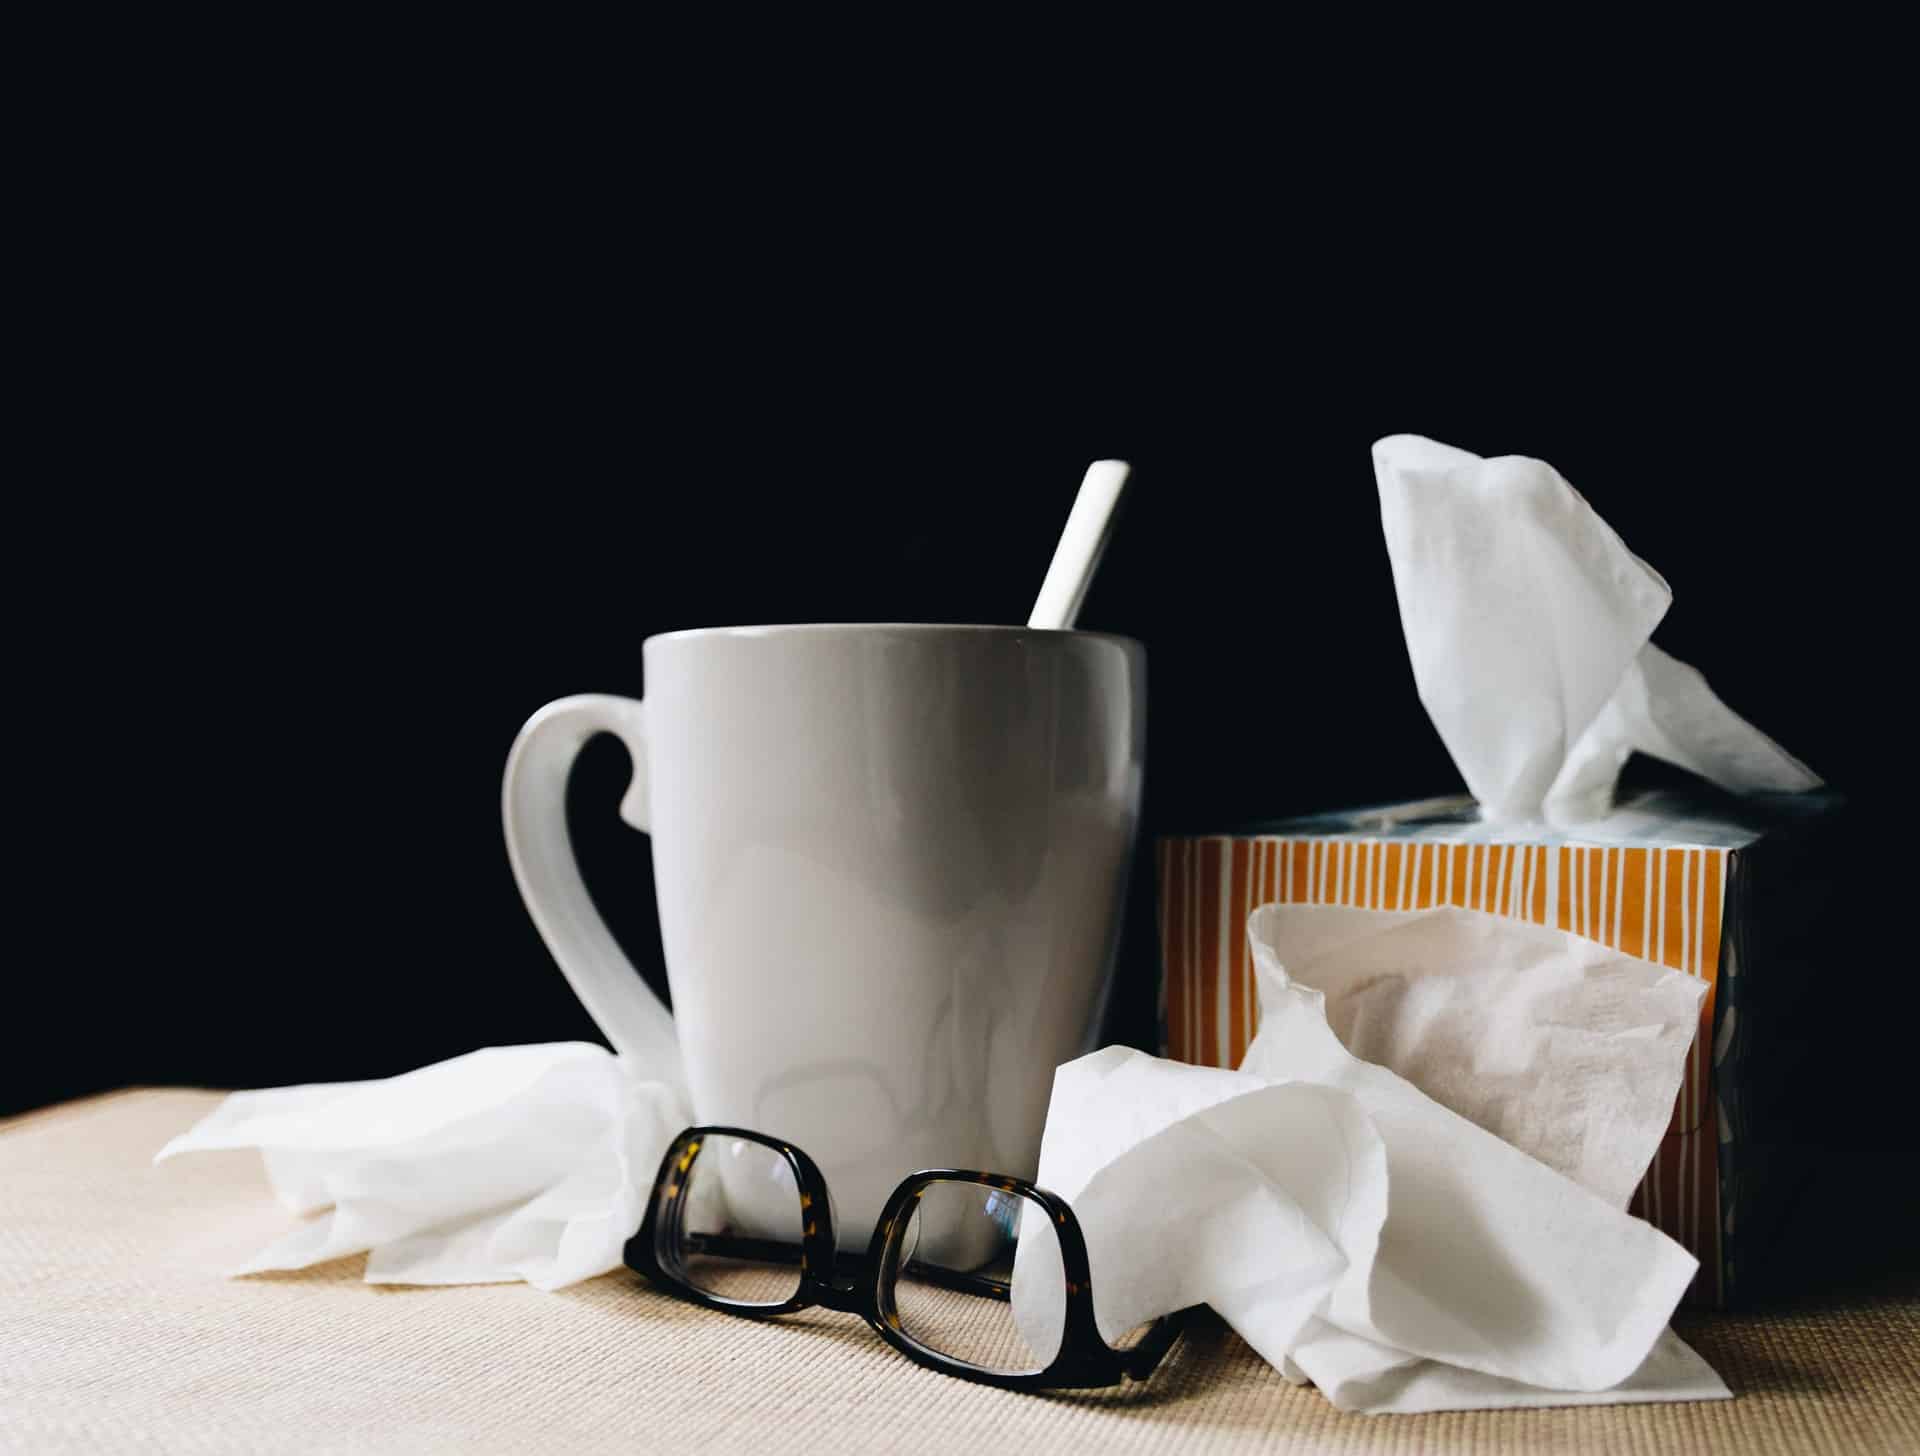 Tea and tissues on a table representing staying home from work when sick